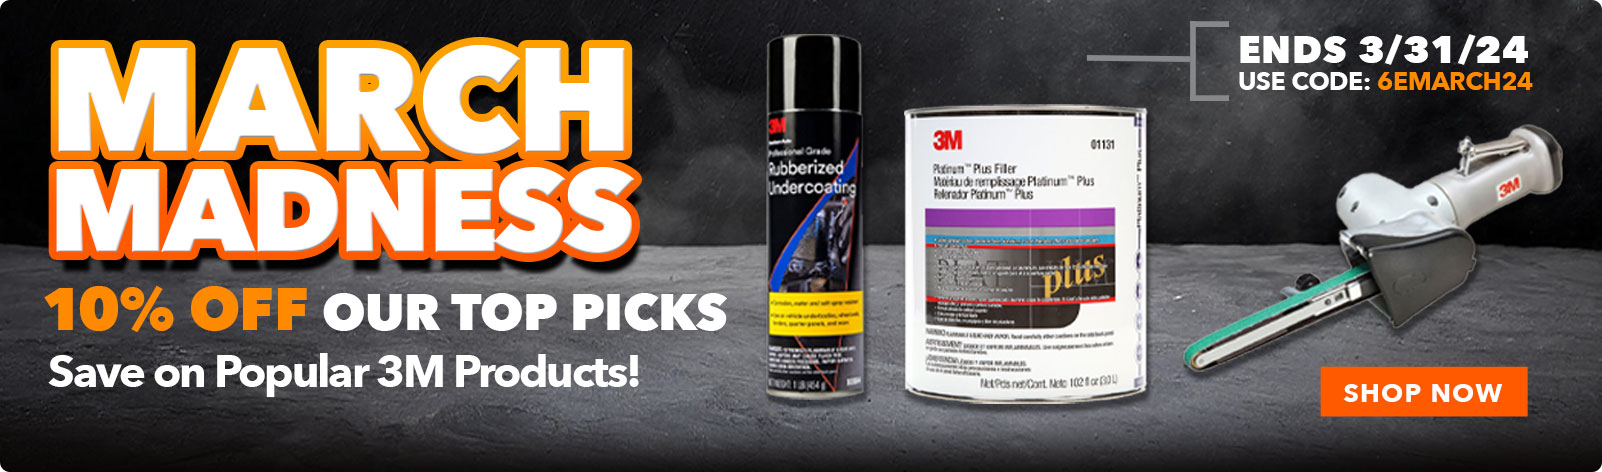 March Madness 10% Off 3M Products